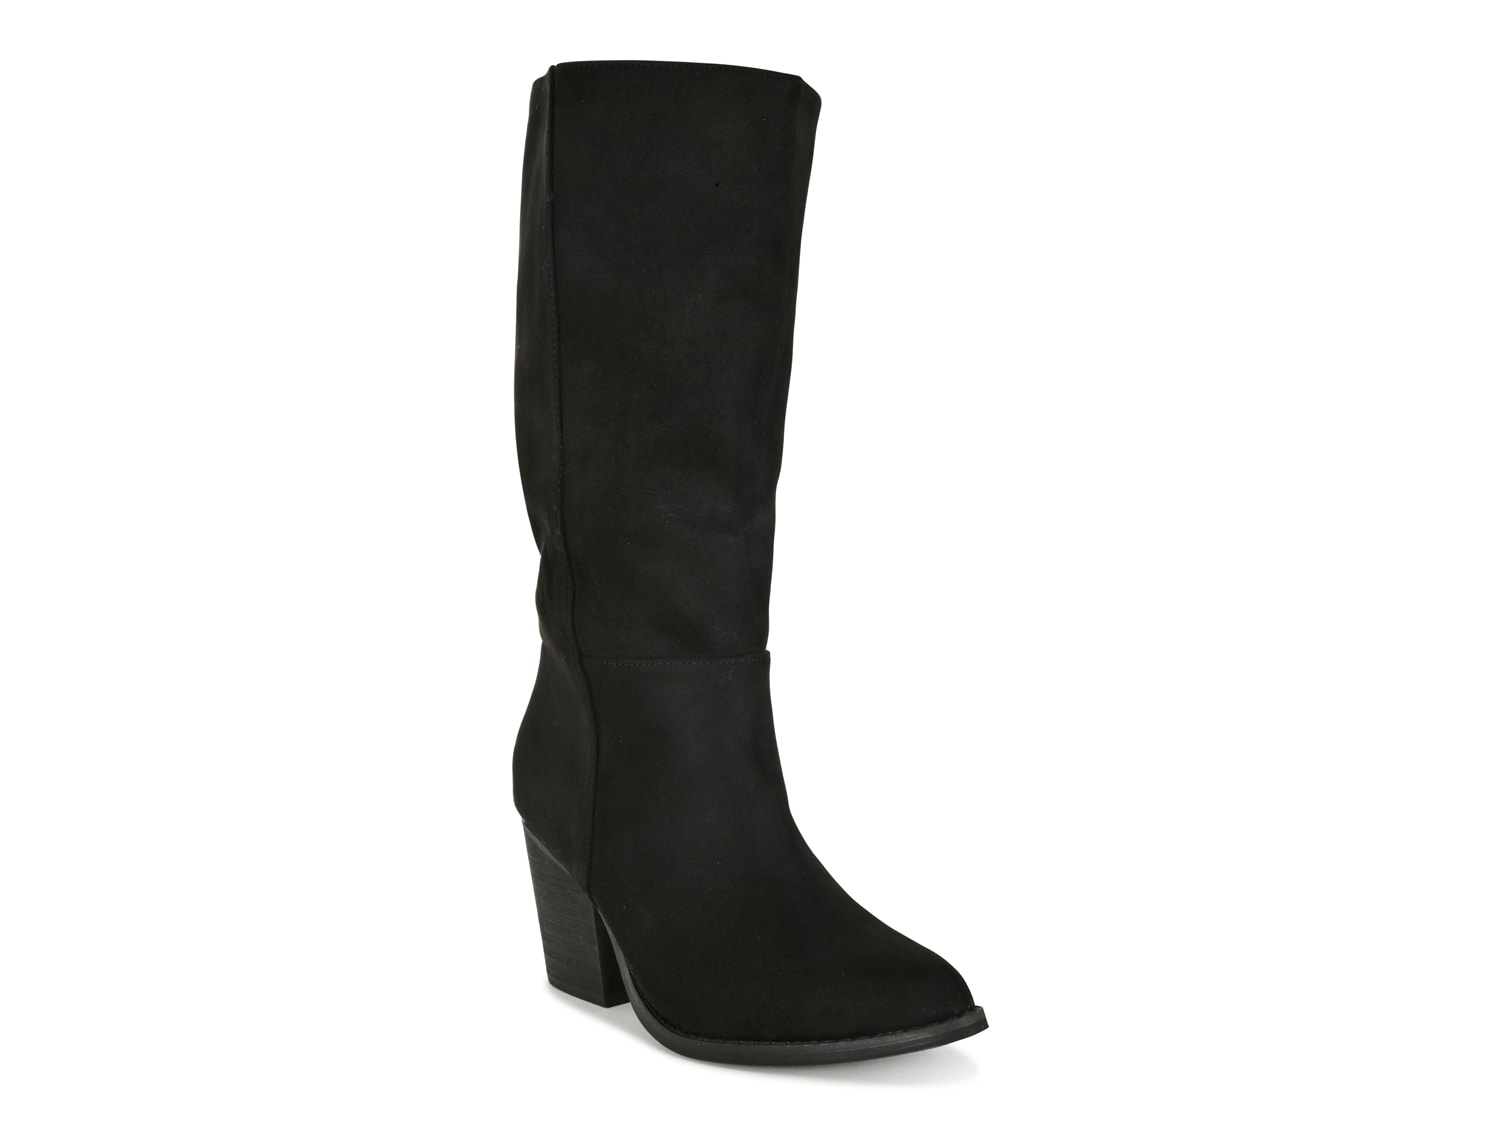 Ninety Union Park Ave Boot - Free Shipping | DSW